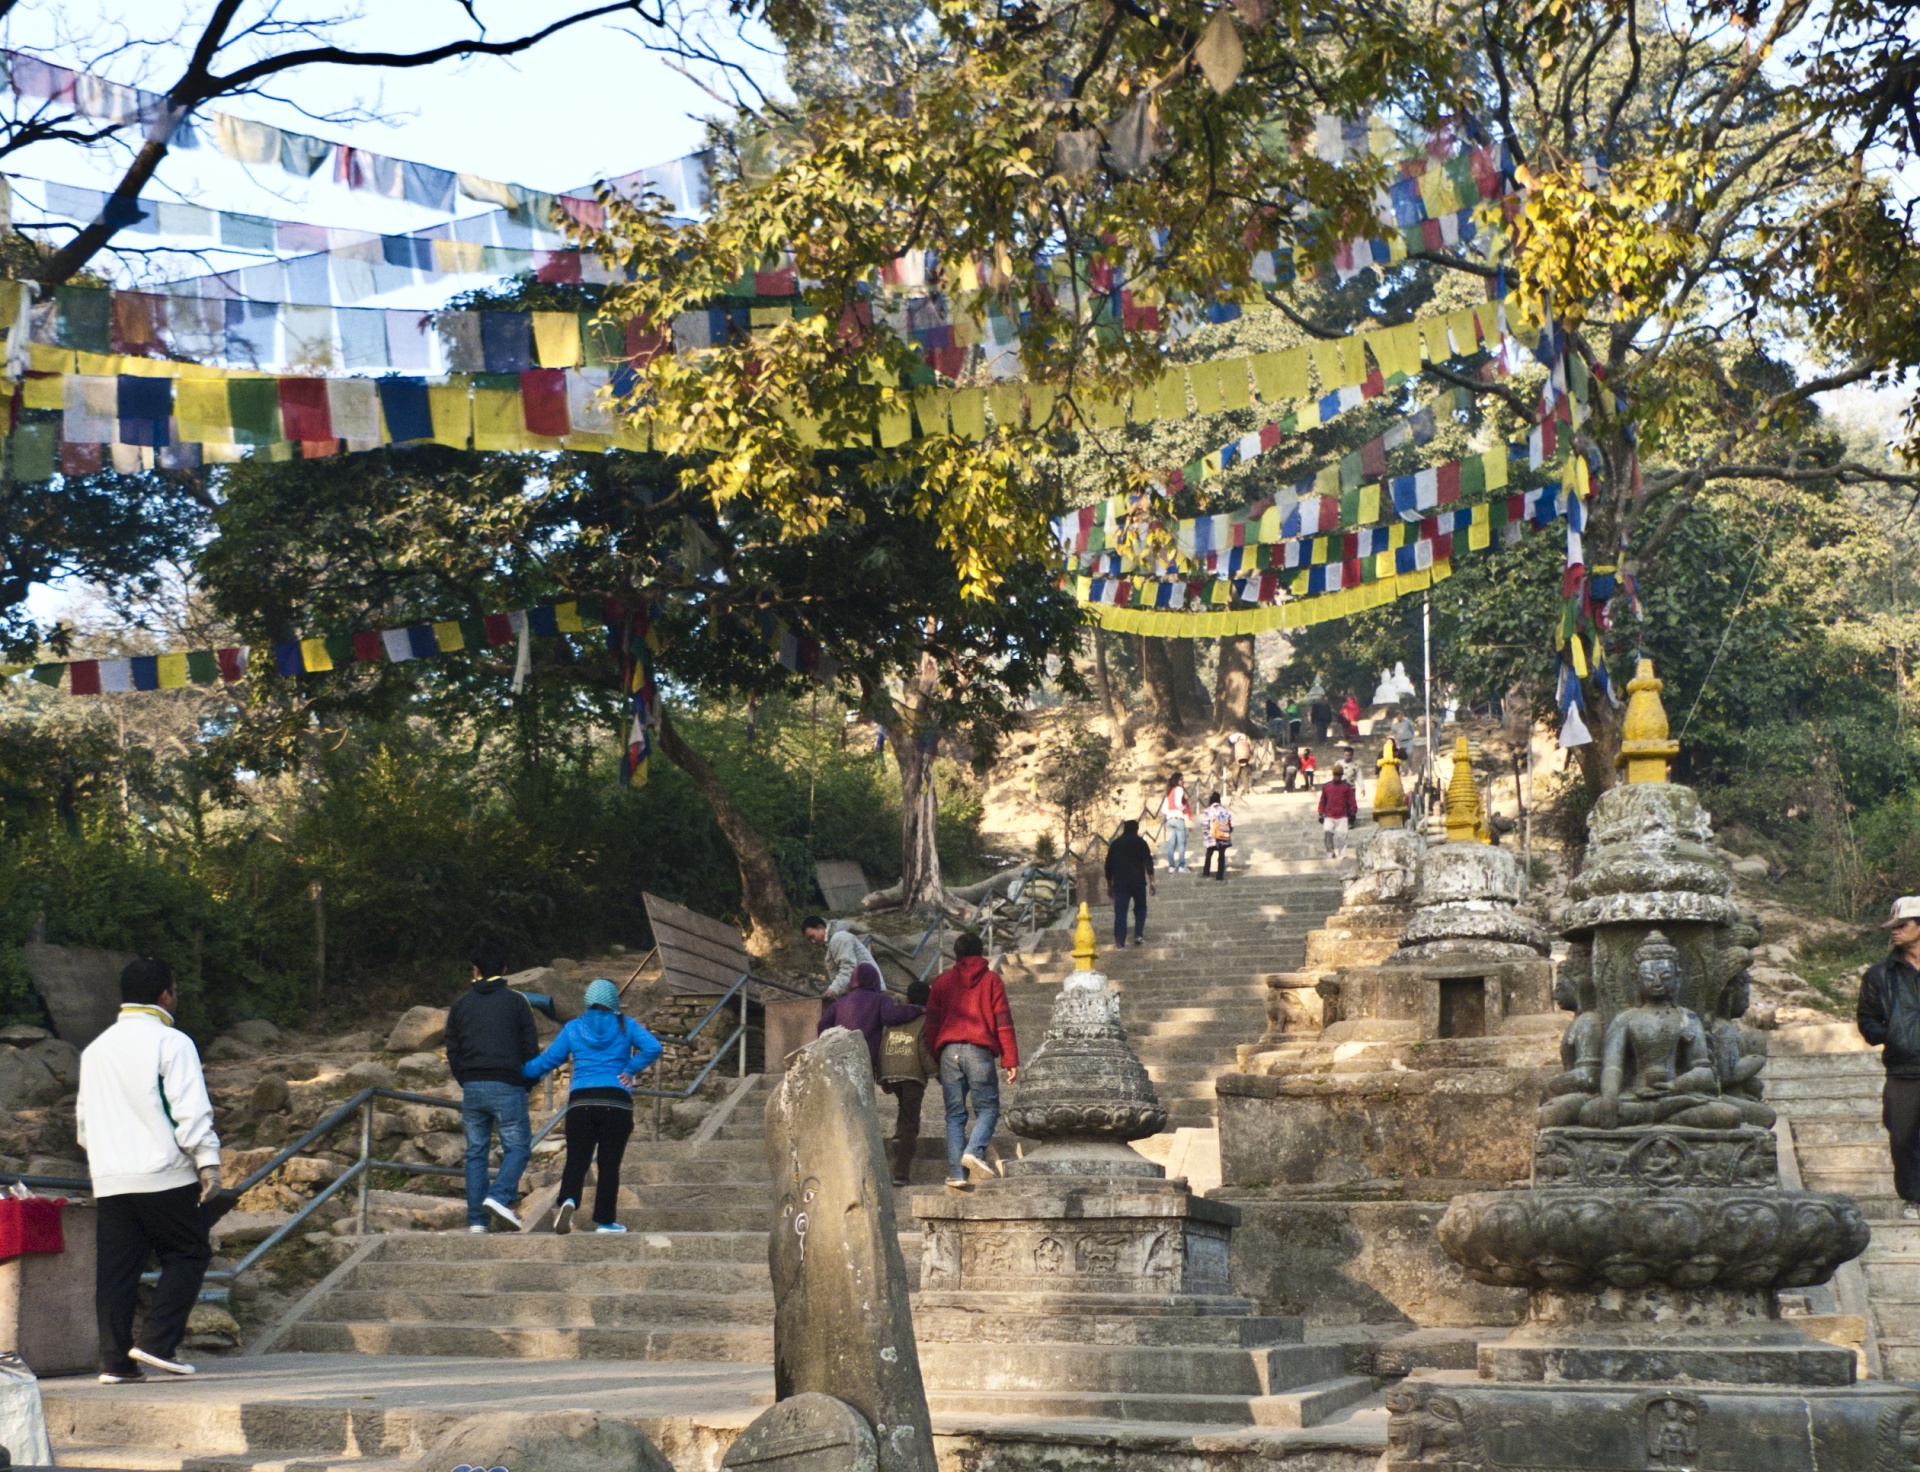 Approaching the Swayambunath Buddhist temple complex, which lies on a hill to the west of central Kathmandu.